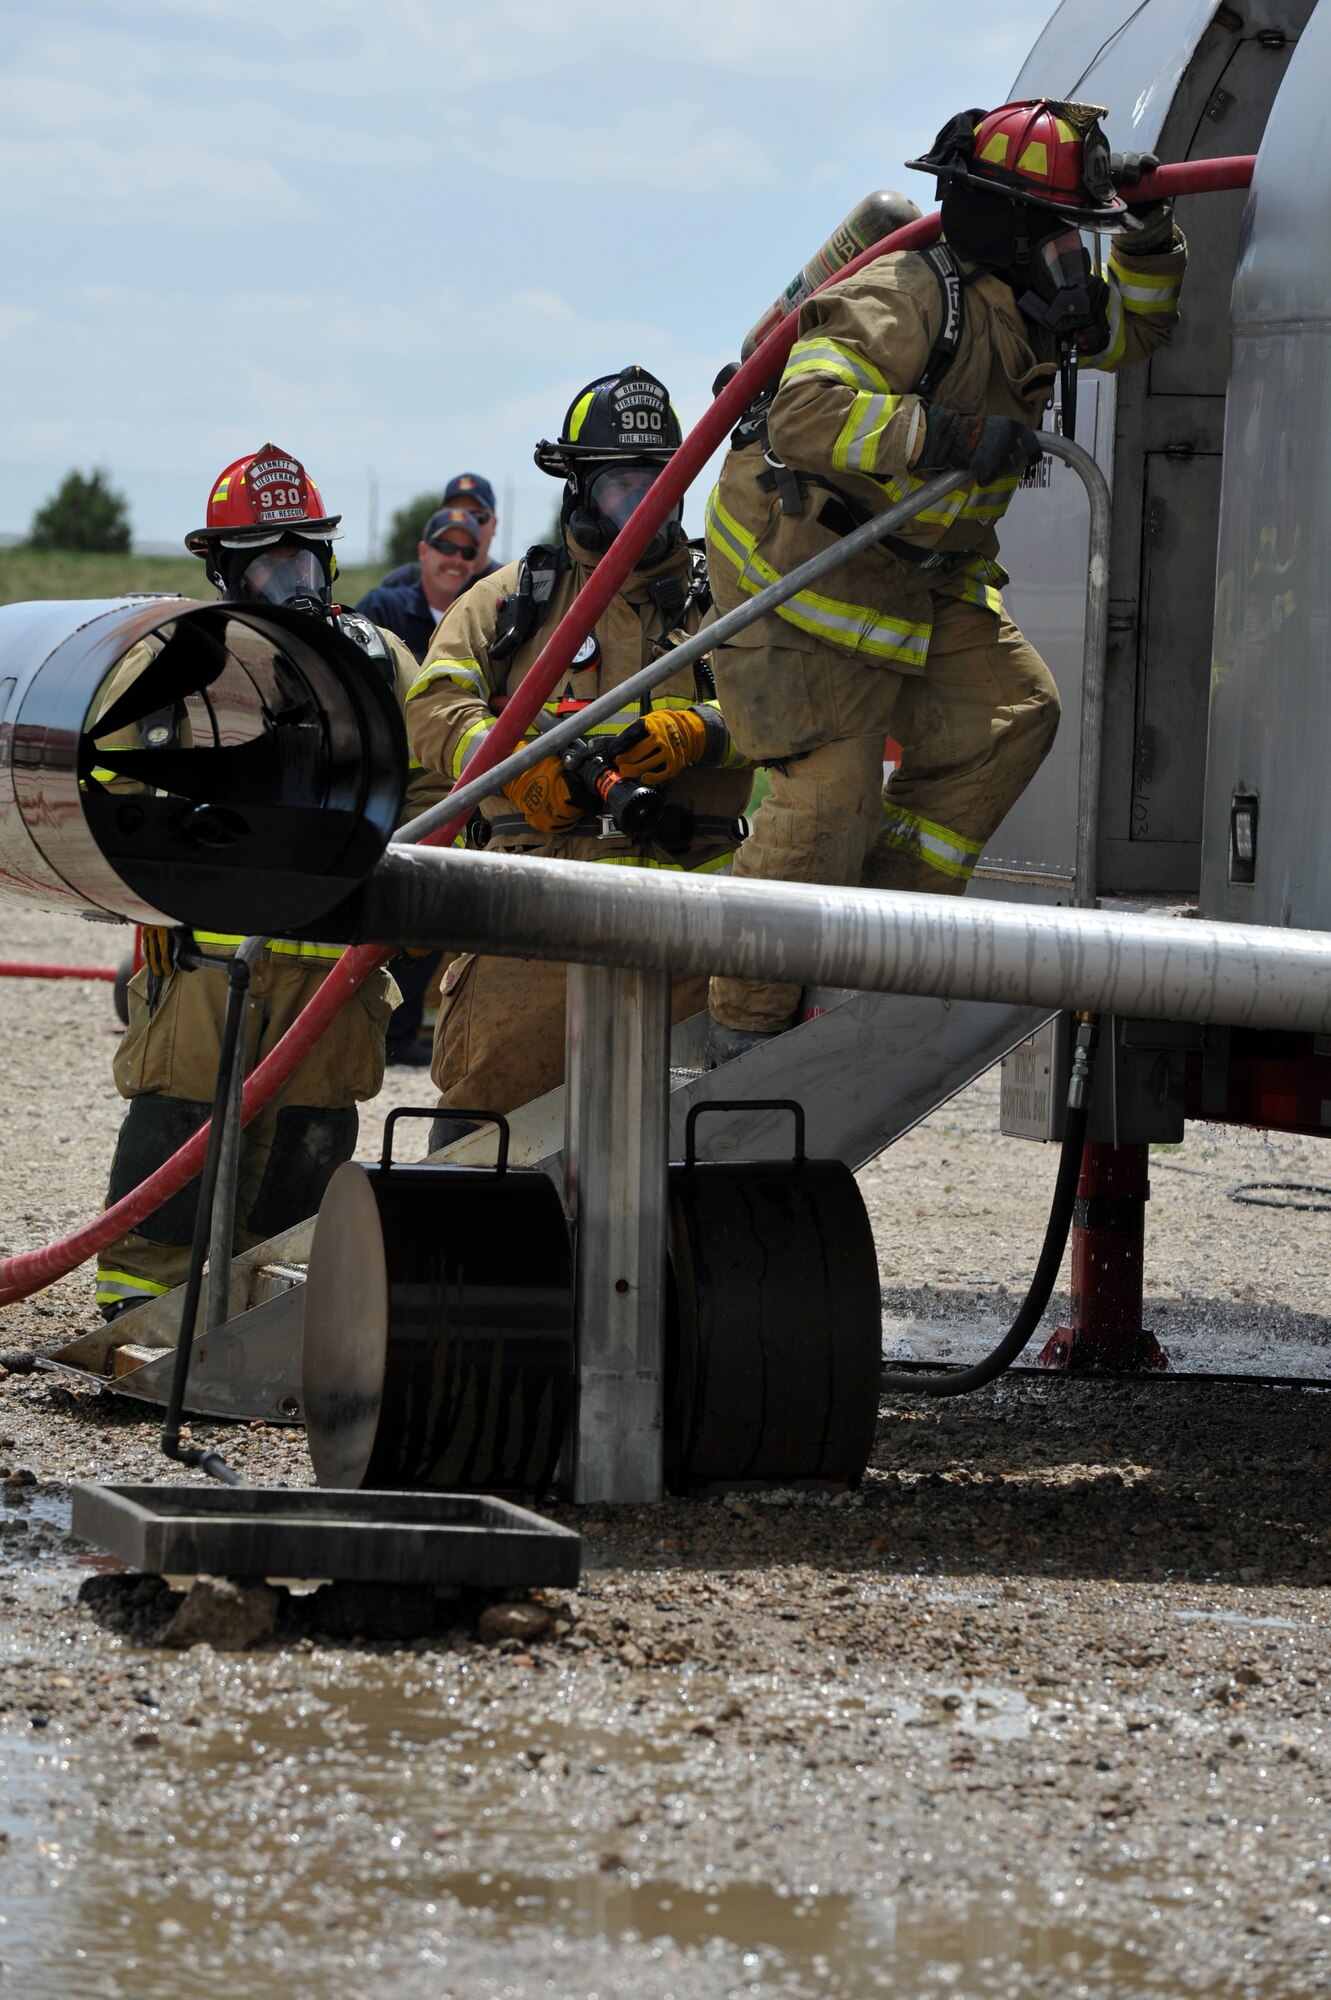 BUCKLEY AIR FORCE BASE, Colo. -- Aurora firefighters enter a mobile air fire trainer to during an exercise May 30, 2012. (U.S. Air Force photo by Airman 1st Class Darryl Bolden Jr.)
